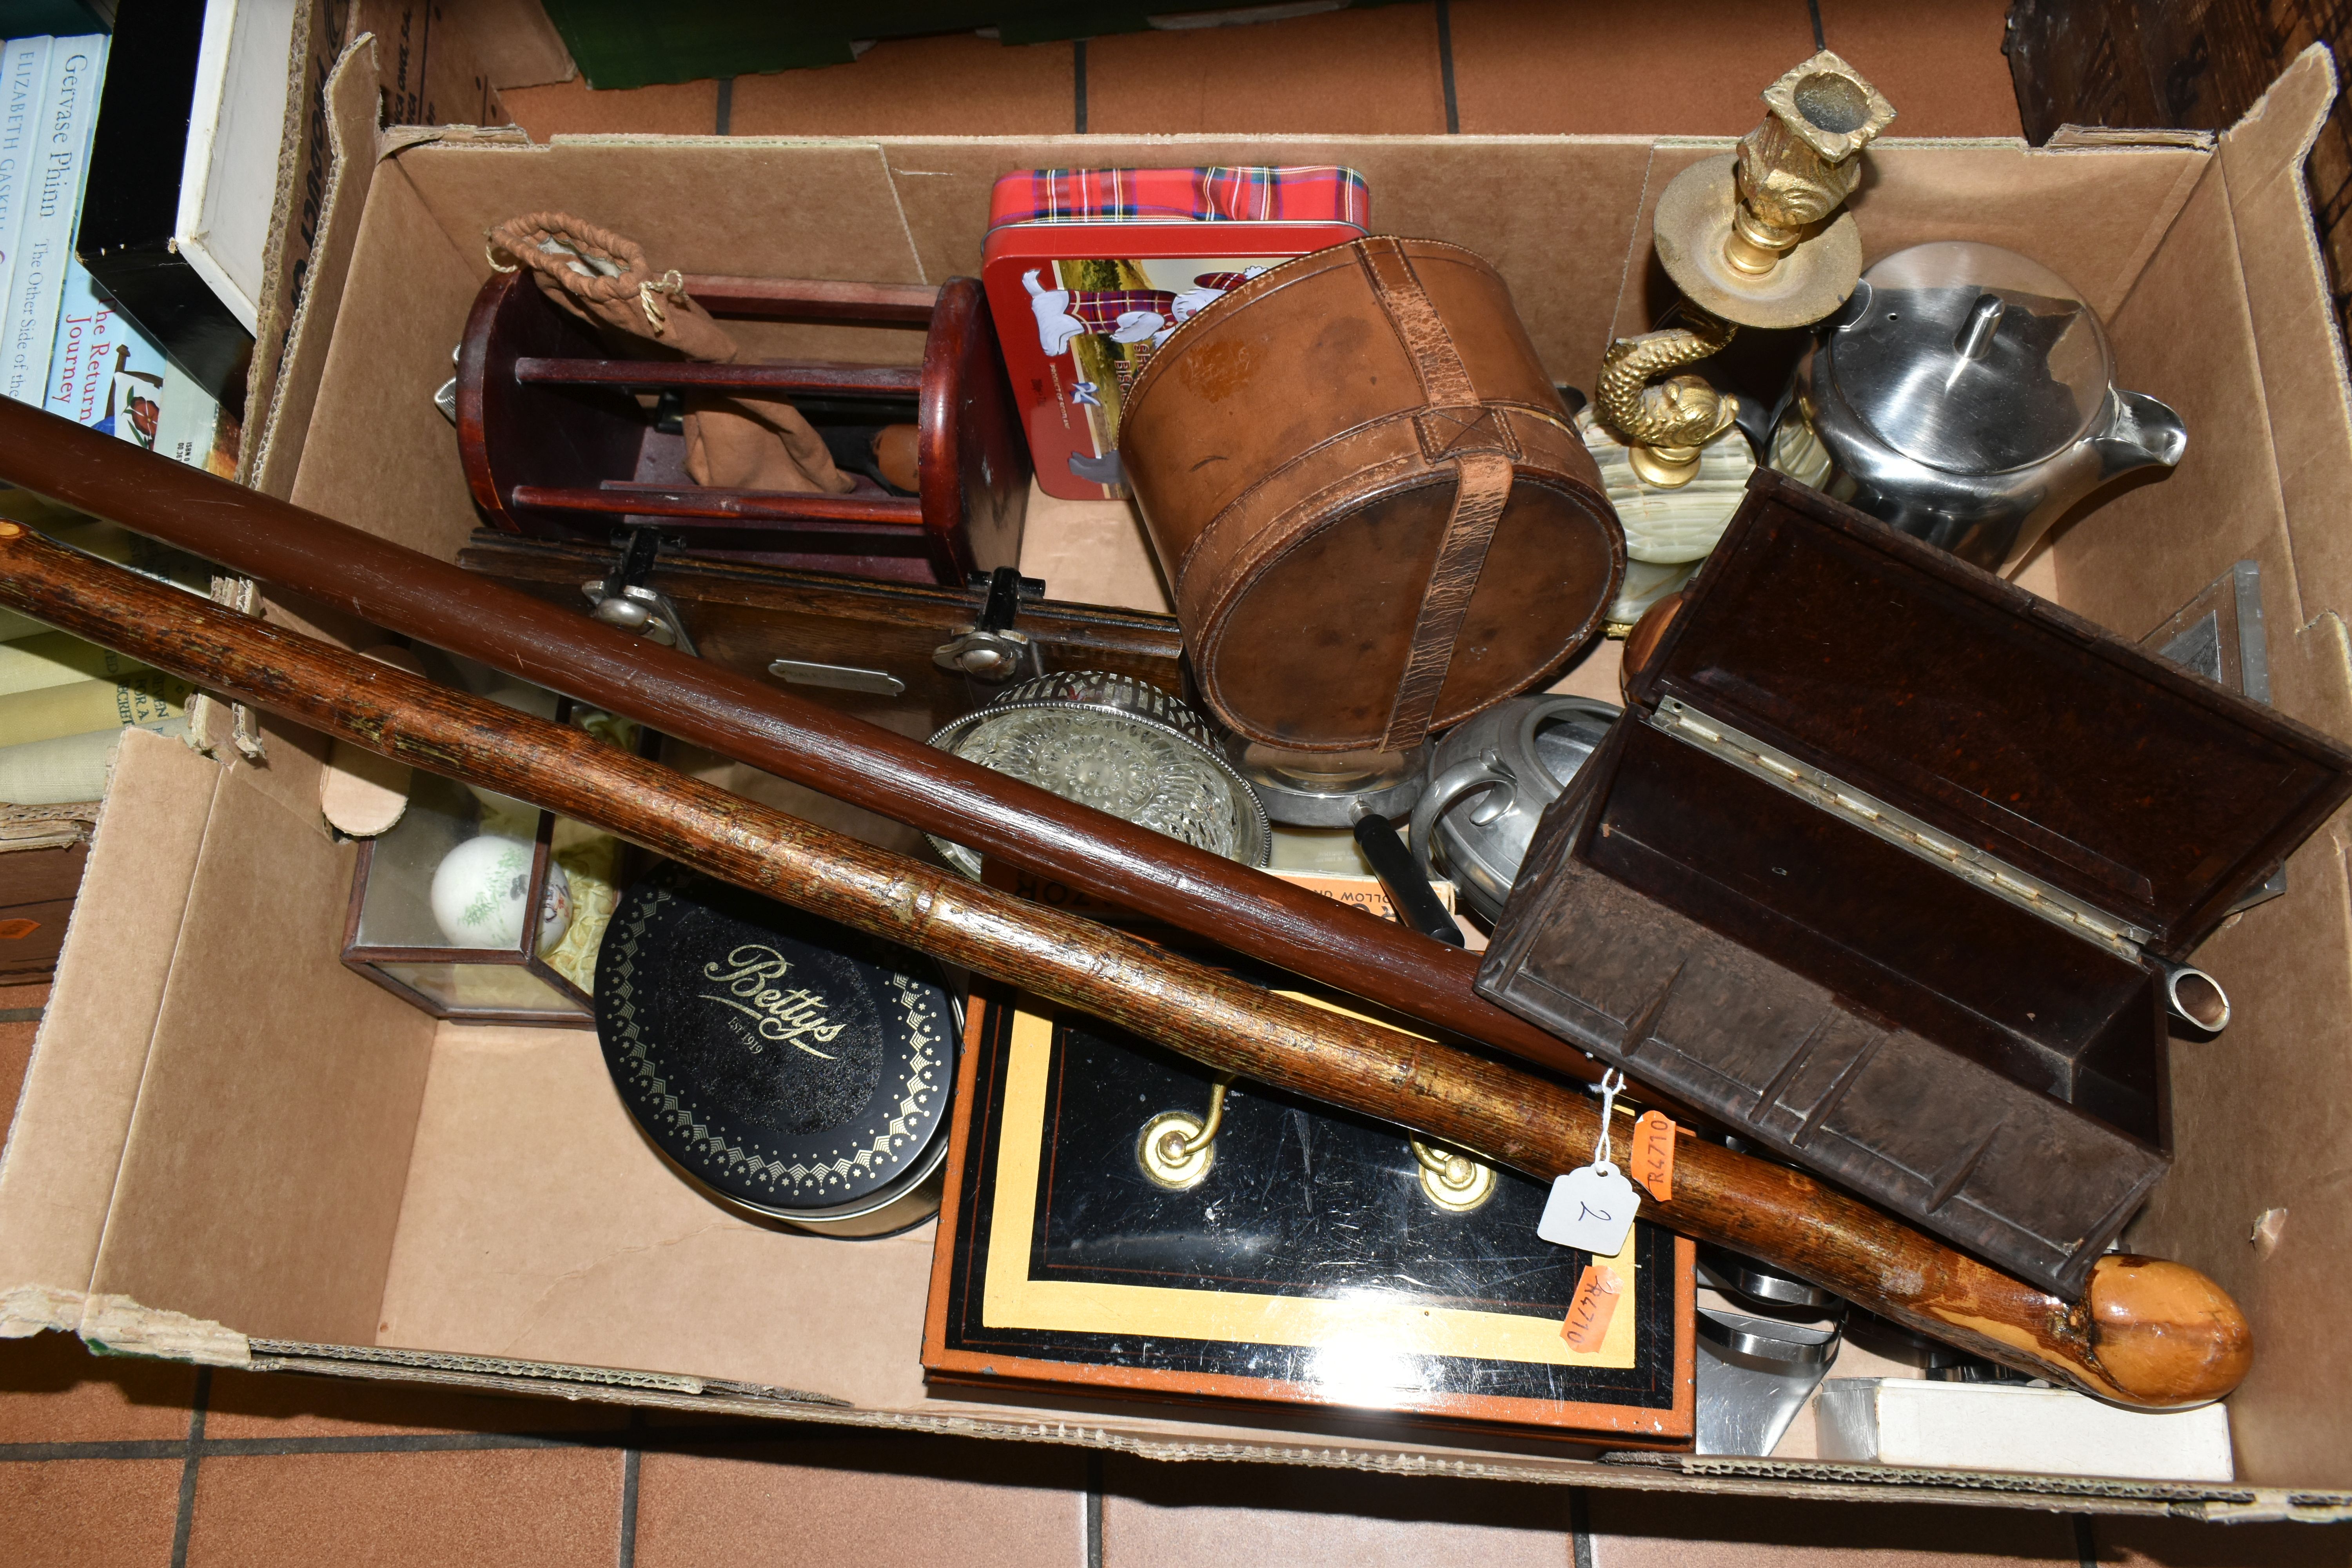 FOUR BOXES OF BOOKS AND MISCELLANEOUS SUNDRIES, to include two walking sticks, onyx candle holder, a - Image 2 of 6